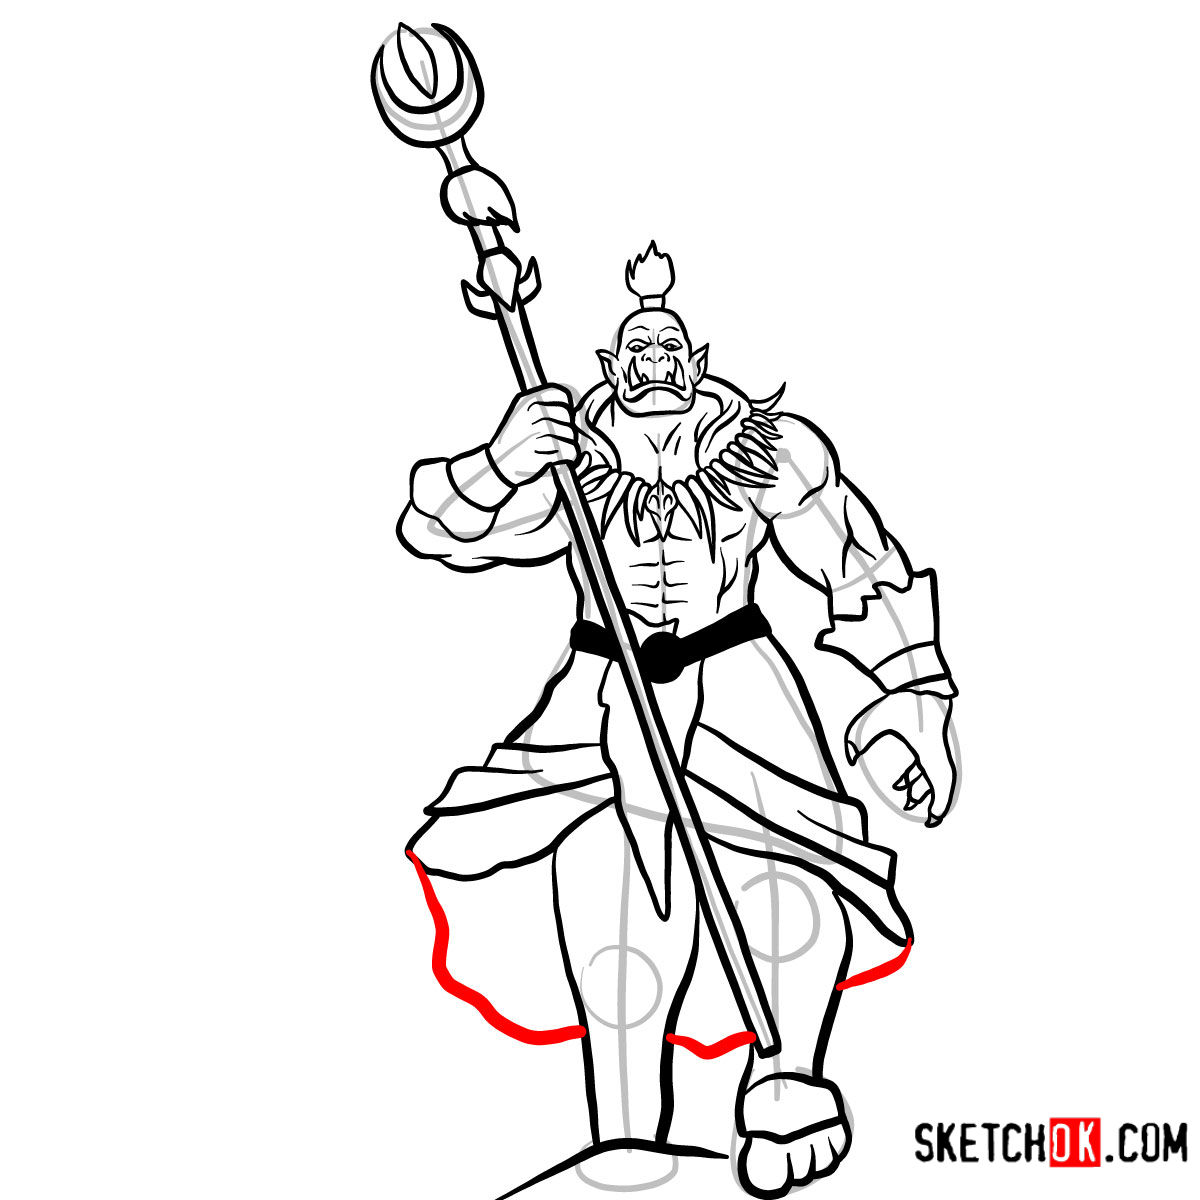 How to draw Ner'zhul | World of Warcraft - step 15